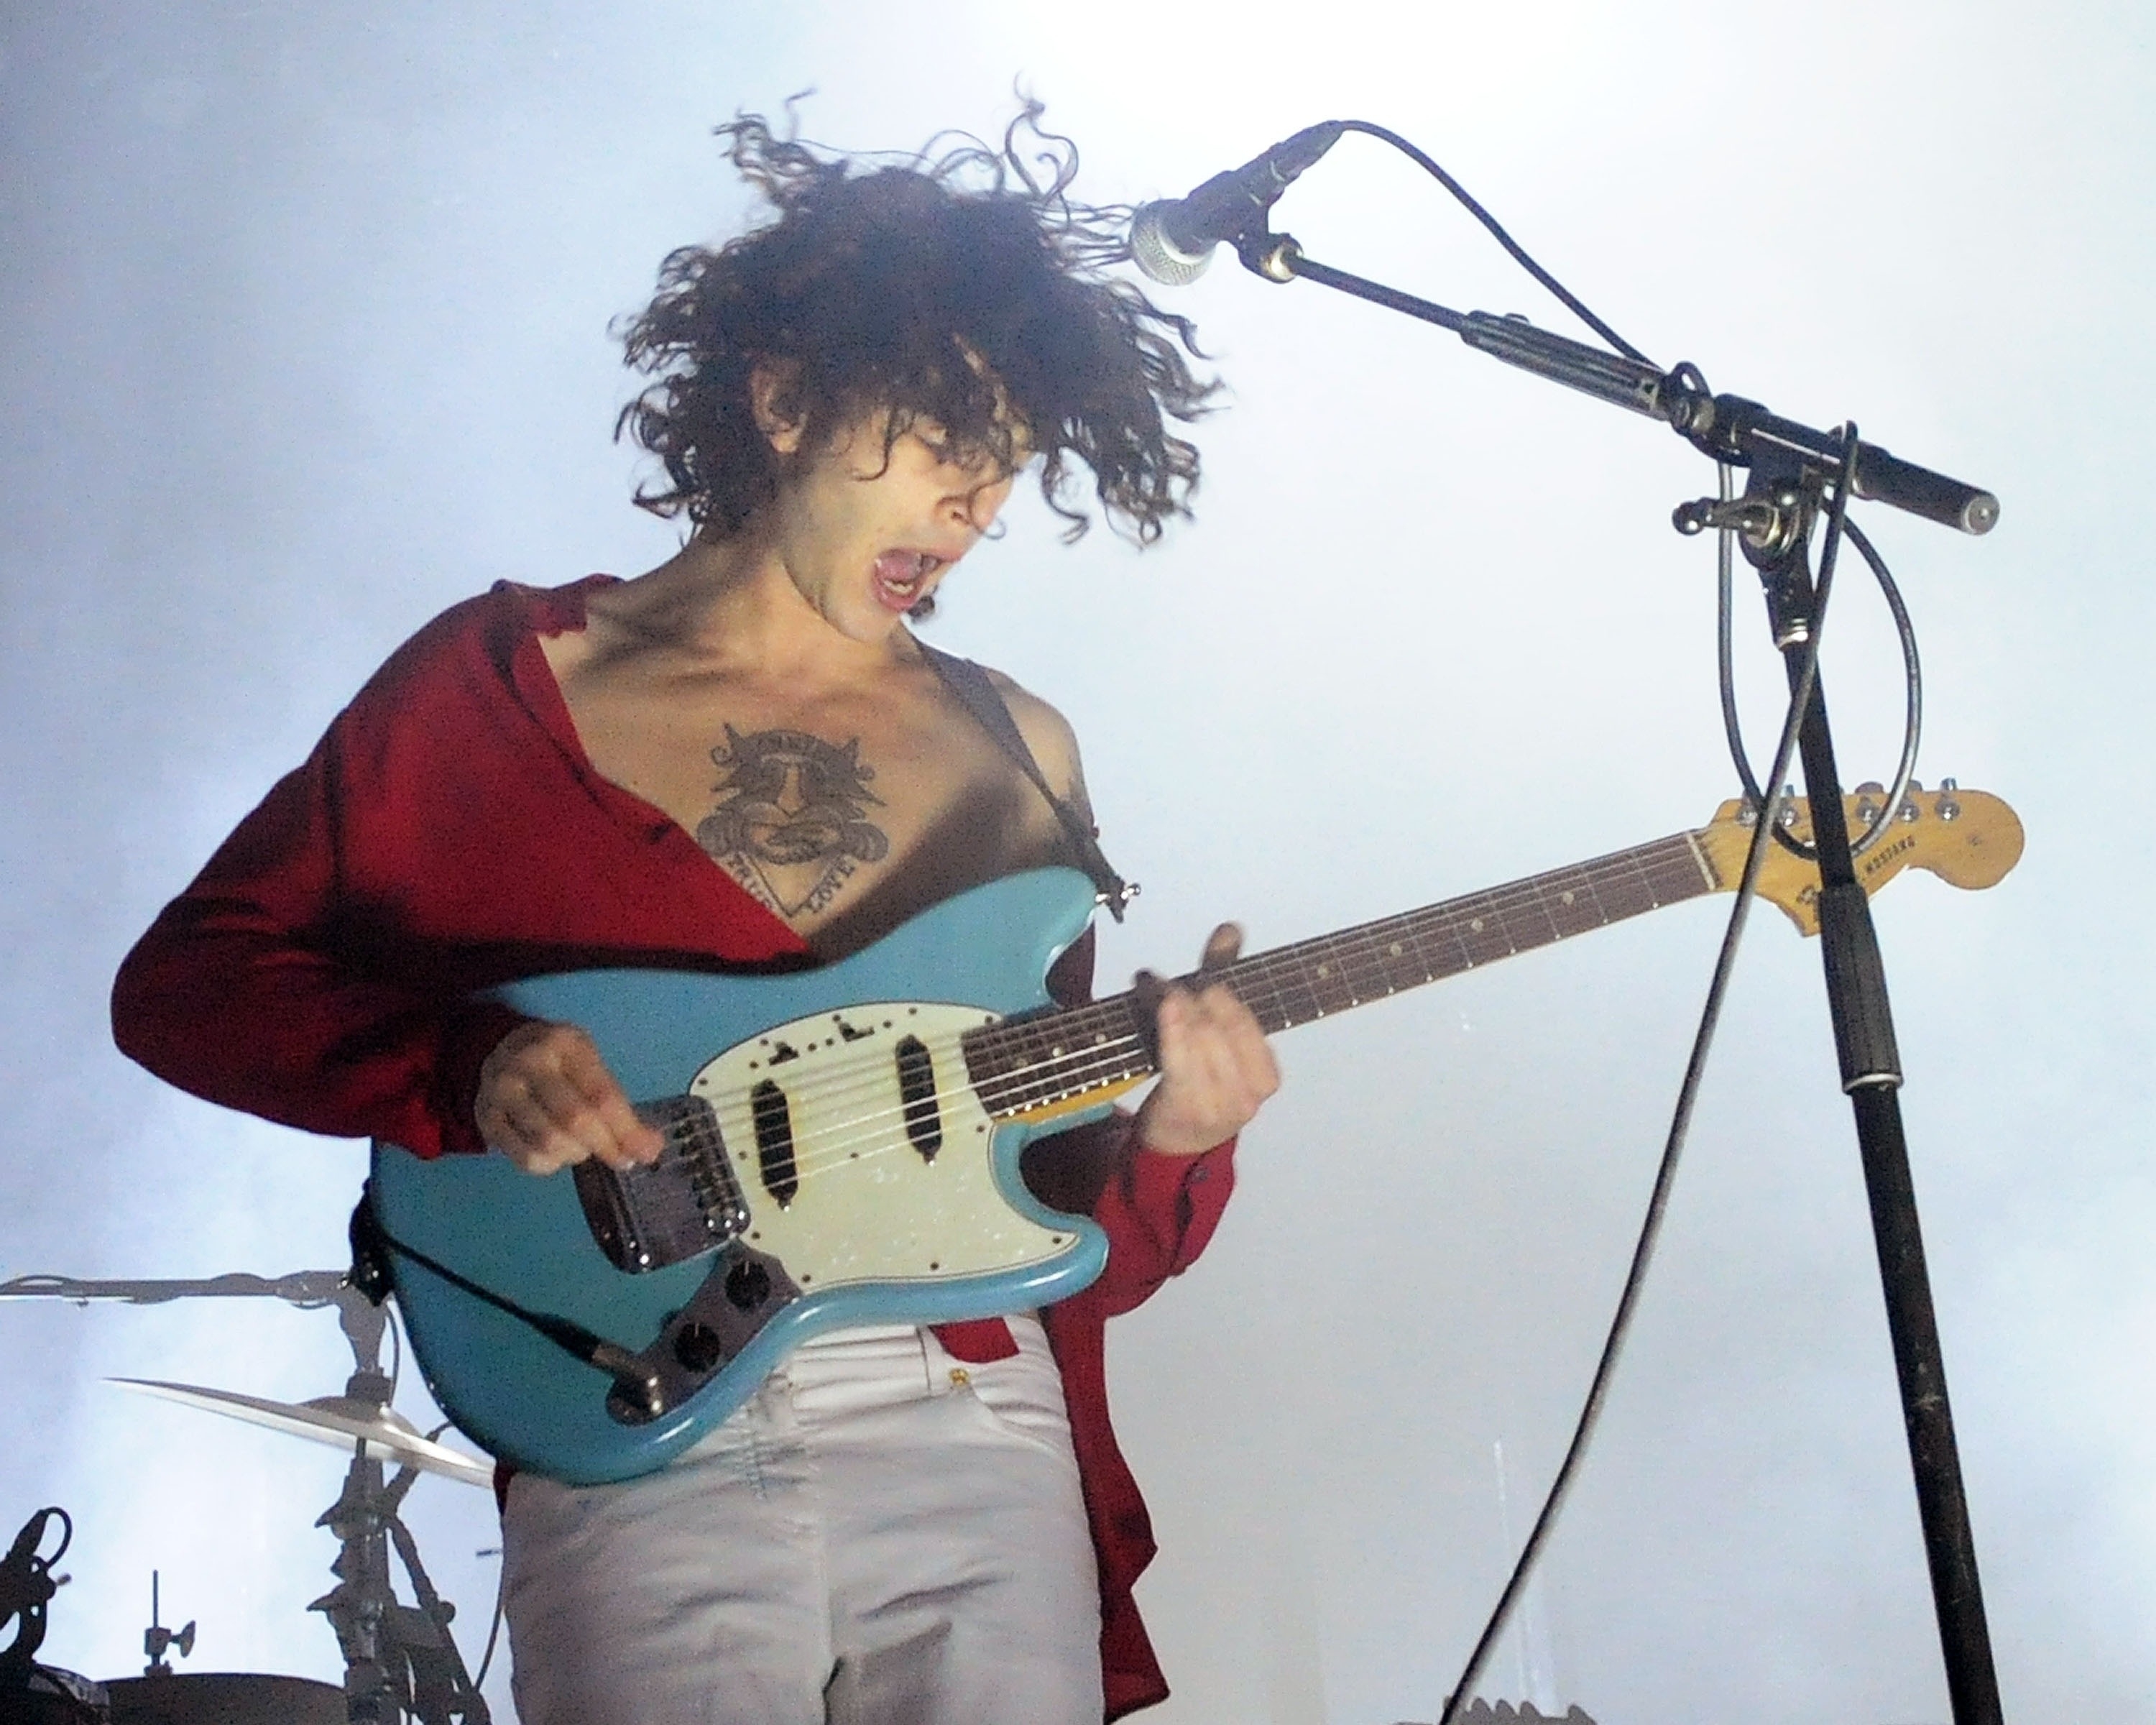 Matty Healy mid-performance playing electric guitar, tattoos visible, casual outfit, focused expression